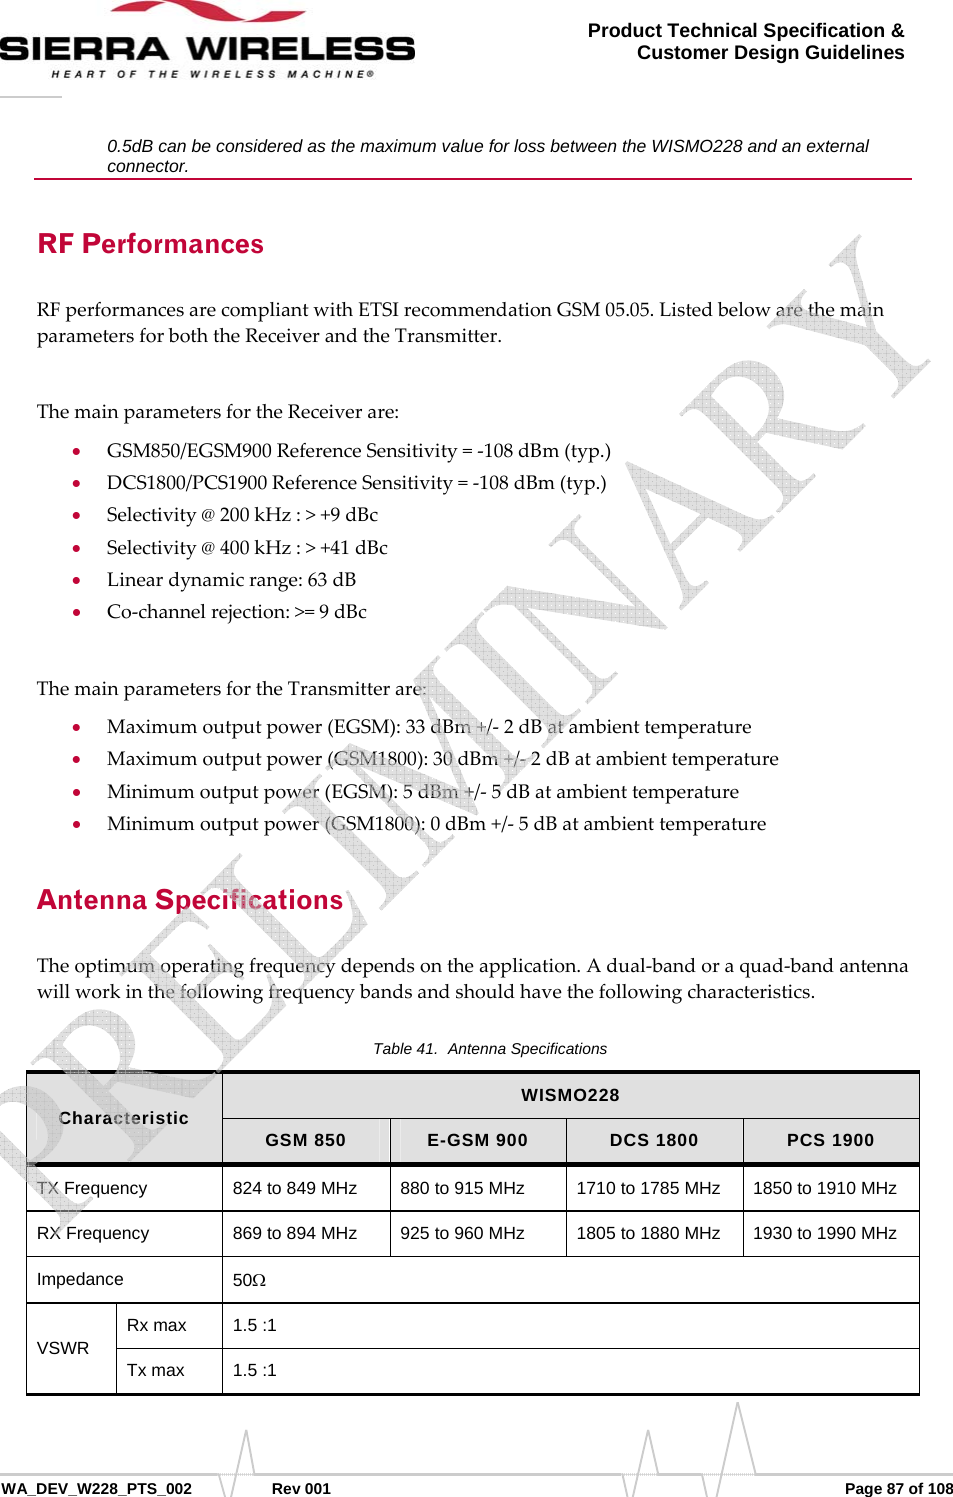      WA_DEV_W228_PTS_002 Rev 001  Page 87 of 108 Product Technical Specification &amp; Customer Design Guidelines 0.5dB can be considered as the maximum value for loss between the WISMO228 and an external connector. RF Performances RFperformancesarecompliantwithETSIrecommendationGSM05.05.ListedbelowarethemainparametersforboththeReceiverandtheTransmitter.ThemainparametersfortheReceiverare:• GSM850/EGSM900ReferenceSensitivity=‐108dBm(typ.)• DCS1800/PCS1900ReferenceSensitivity=‐108dBm(typ.)• Selectivity@200kHz:&gt;+9dBc• Selectivity@400kHz:&gt;+41dBc• Lineardynamicrange:63dB• Co‐channelrejection:&gt;=9dBcThemainparametersfortheTransmitterare:• Maximumoutputpower(EGSM):33dBm+/‐2dBatambienttemperature• Maximumoutputpower(GSM1800):30dBm+/‐2dBatambienttemperature• Minimumoutputpower(EGSM):5dBm+/‐5dBatambienttemperature• Minimumoutputpower(GSM1800):0dBm+/‐5dBatambienttemperatureAntenna Specifications Theoptimumoperatingfrequencydependsontheapplication.Adual‐bandoraquad‐bandantennawillworkinthefollowingfrequencybandsandshouldhavethefollowingcharacteristics.Table 41.  Antenna Specifications Characteristic  WISMO228 GSM 850  E-GSM 900  DCS 1800  PCS 1900 TX Frequency   824 to 849 MHz  880 to 915 MHz  1710 to 1785 MHz  1850 to 1910 MHz RX Frequency   869 to 894 MHz  925 to 960 MHz  1805 to 1880 MHz  1930 to 1990 MHz Impedance  50Ω VSWR  Rx max  1.5 :1 Tx max  1.5 :1    